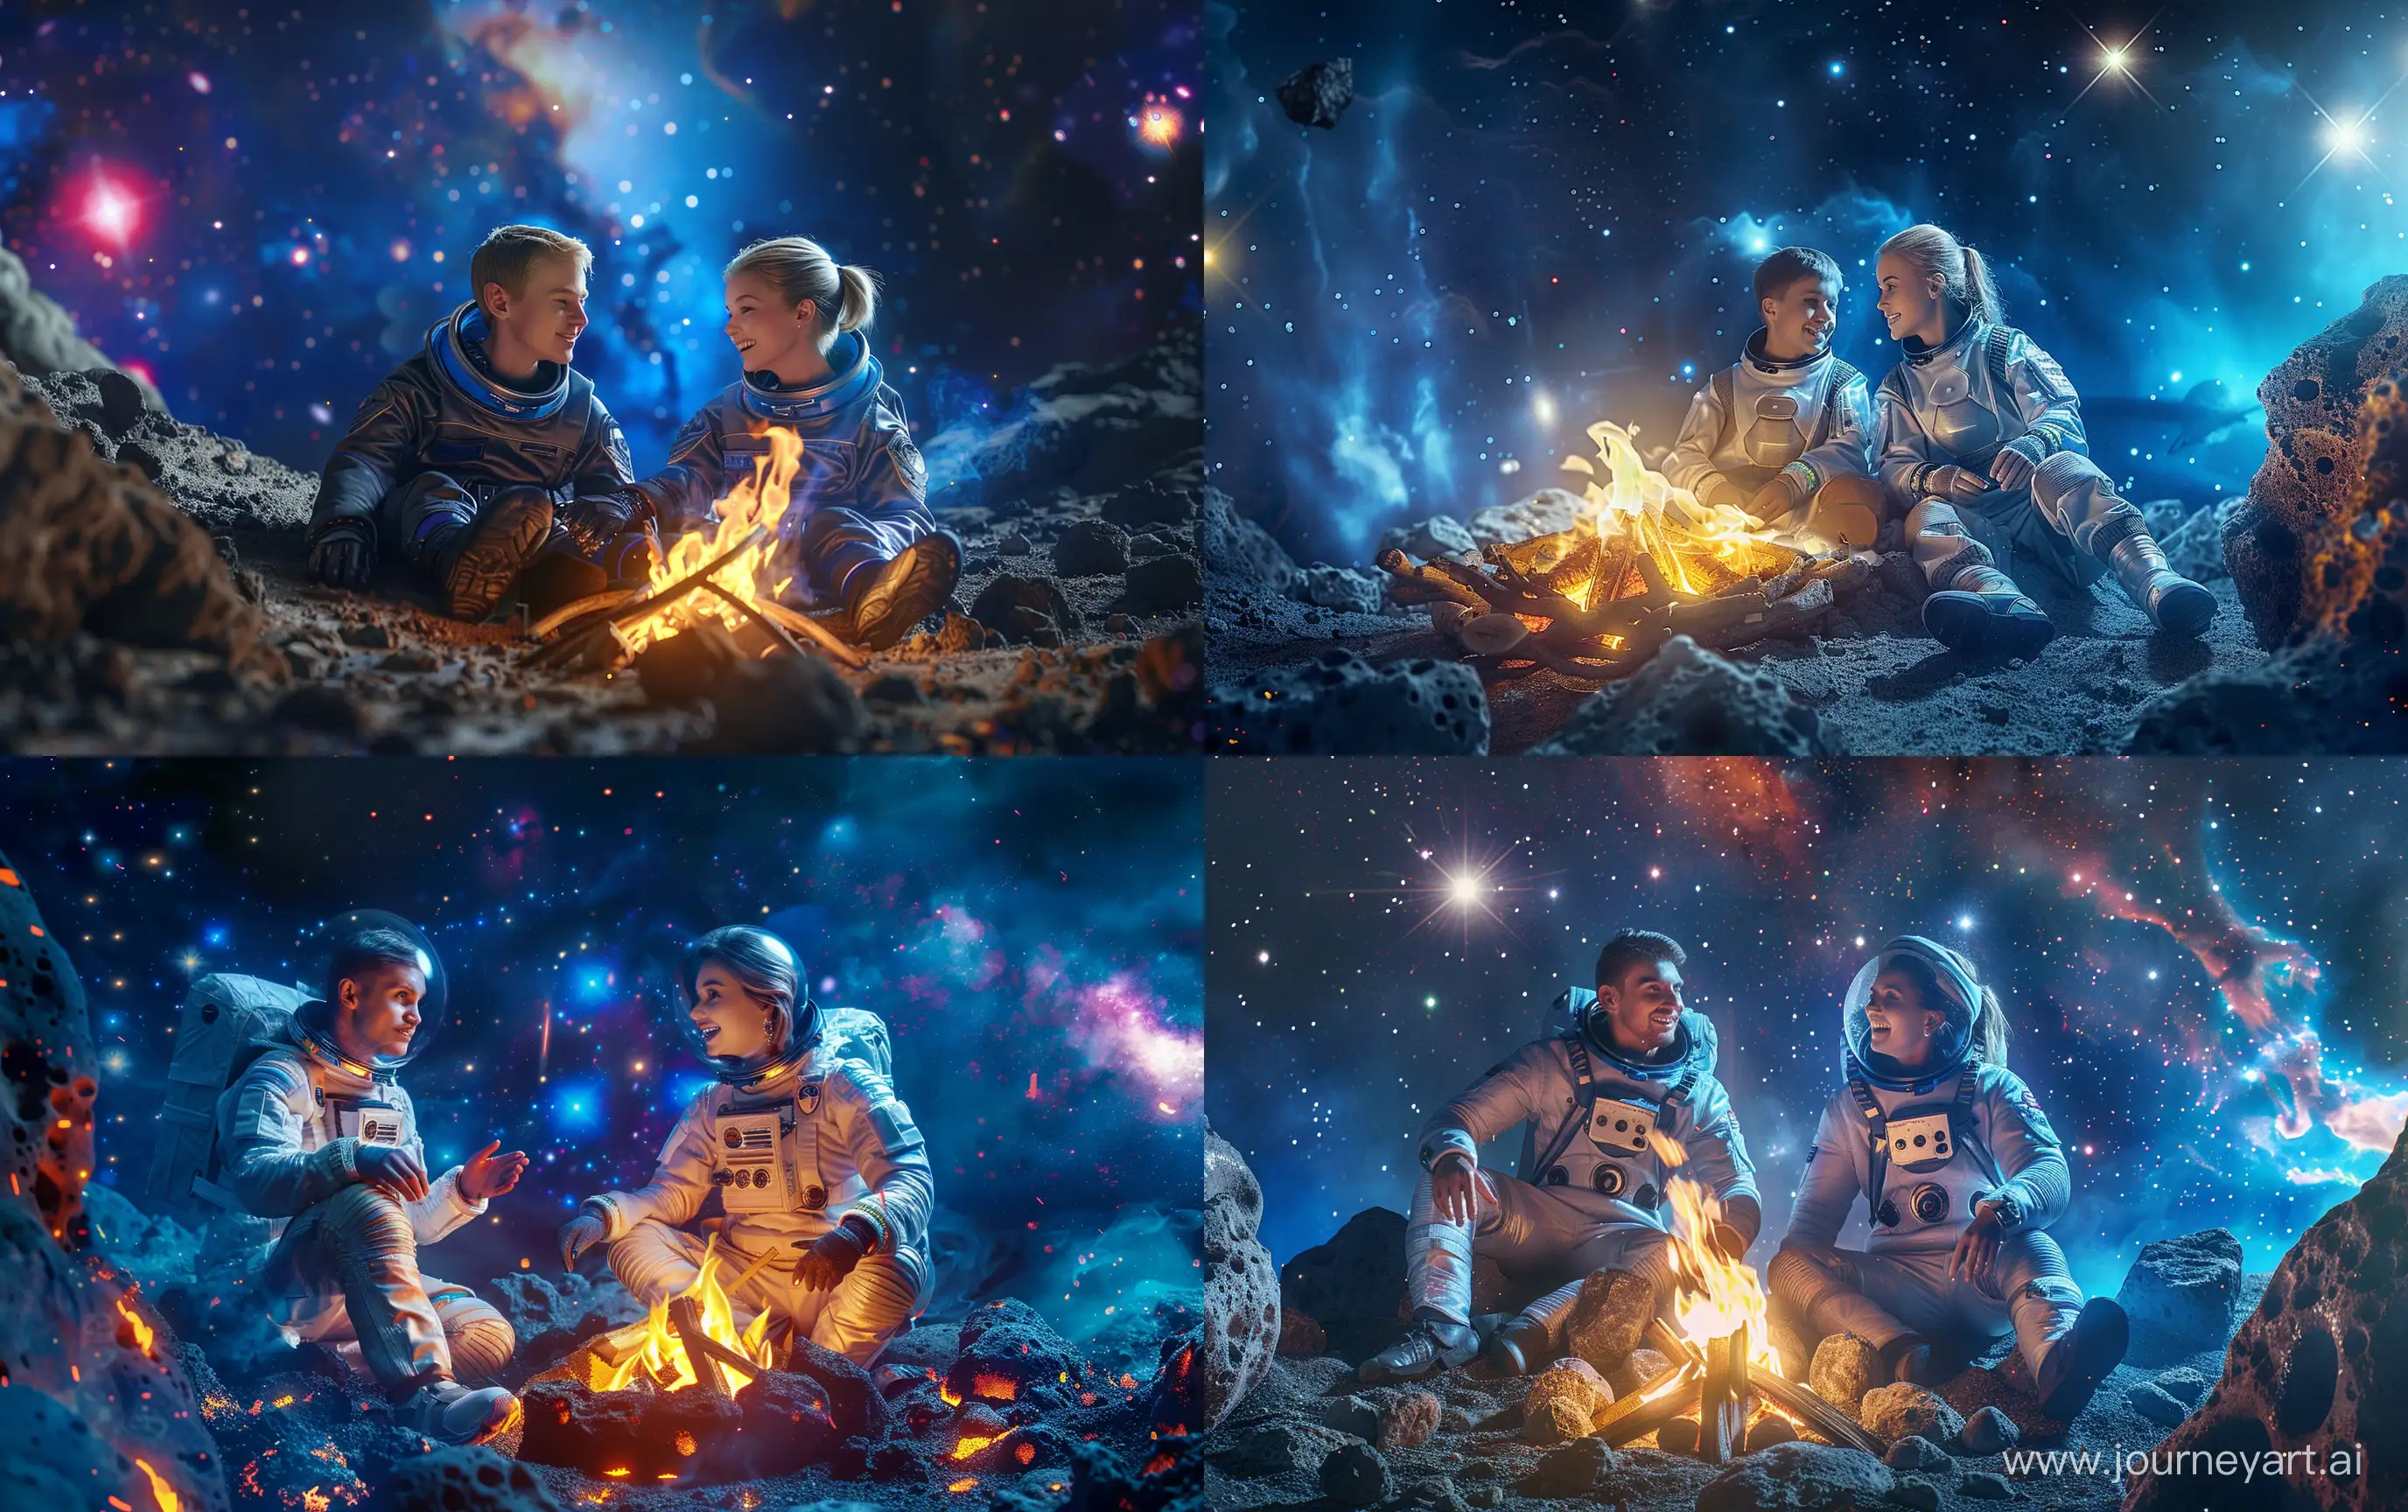 Young man and beautiful young slavonic woman with fair hair in spacesuits without helmets are sitting by the bonfire on an asteroid surface. They are talking happily, young woman is smiling, deep space on background with bright galaxies and supernova, realistic --ar 16:10